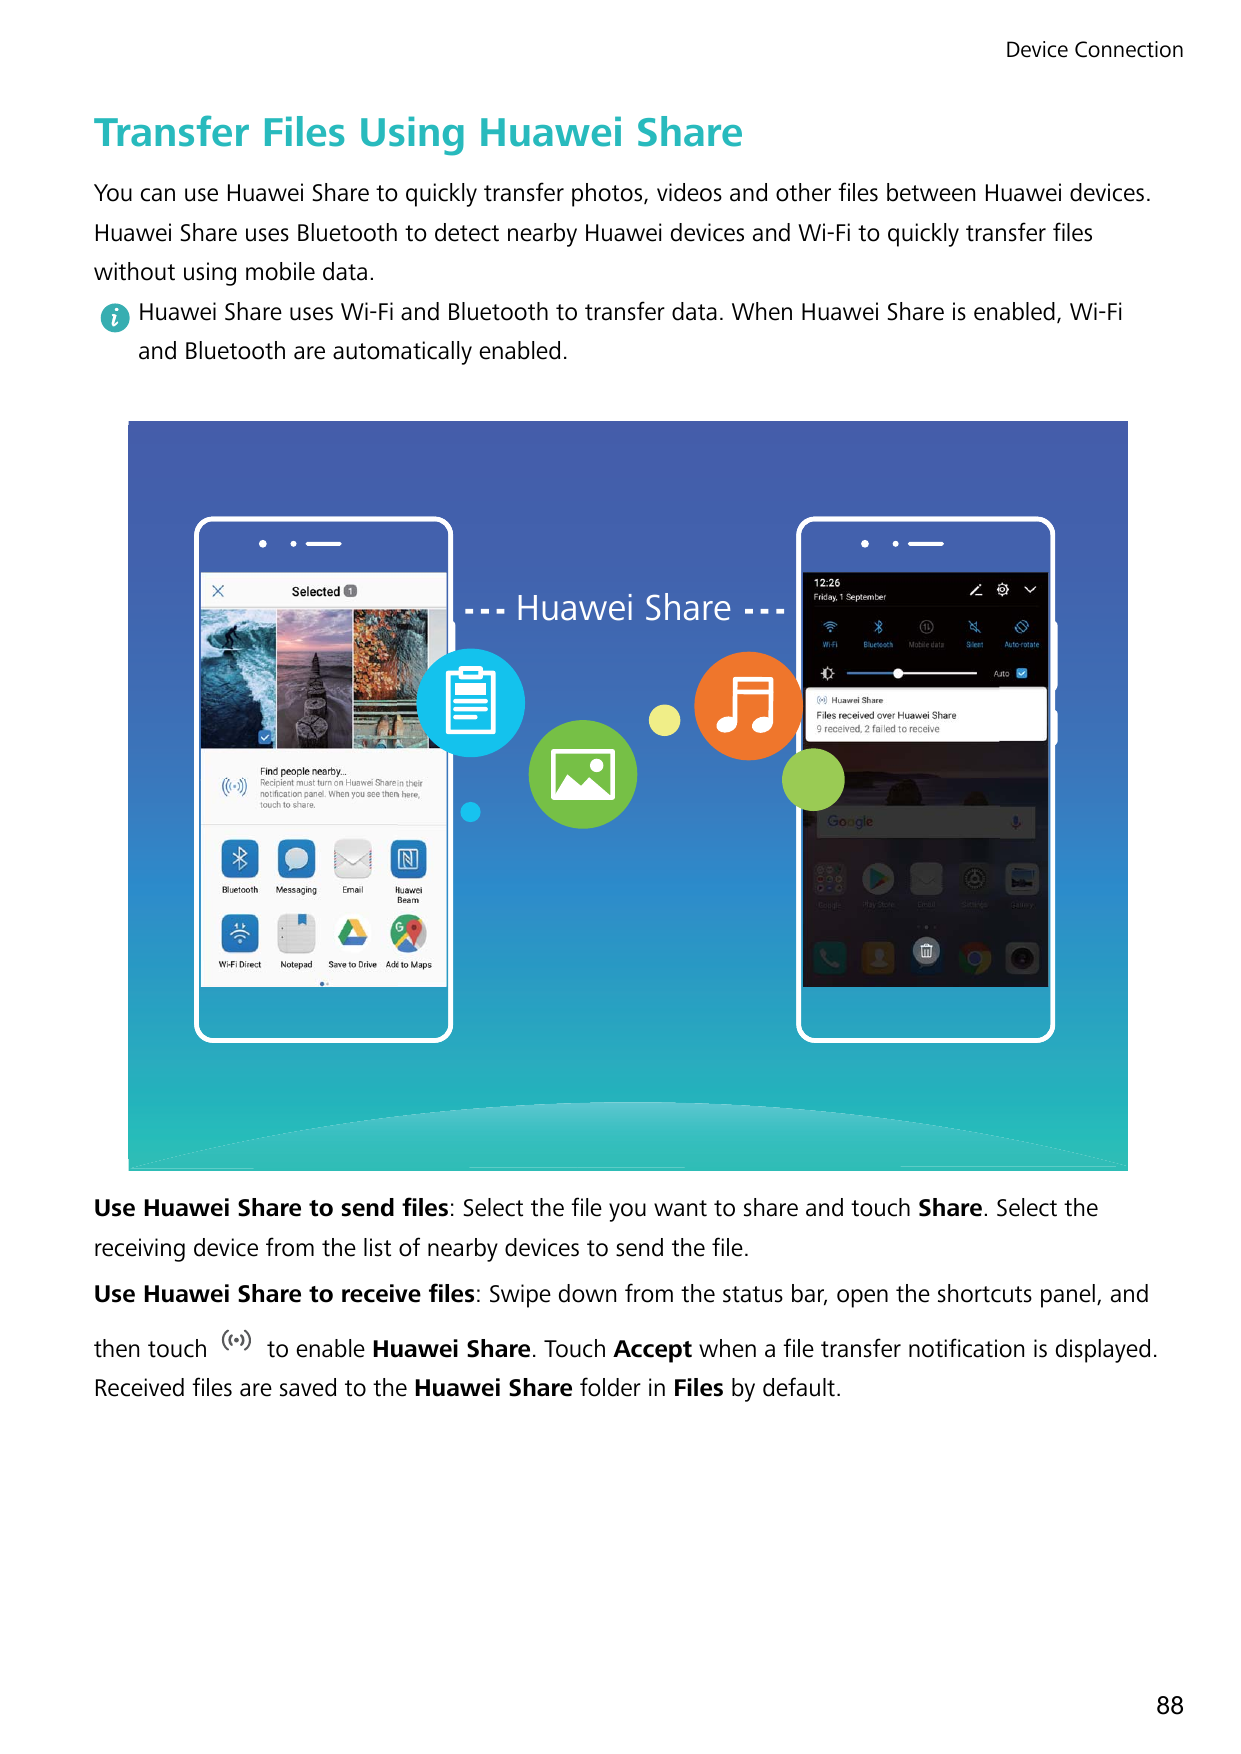 Device ConnectionTransfer Files Using Huawei ShareYou can use Huawei Share to quickly transfer photos, videos and other files be